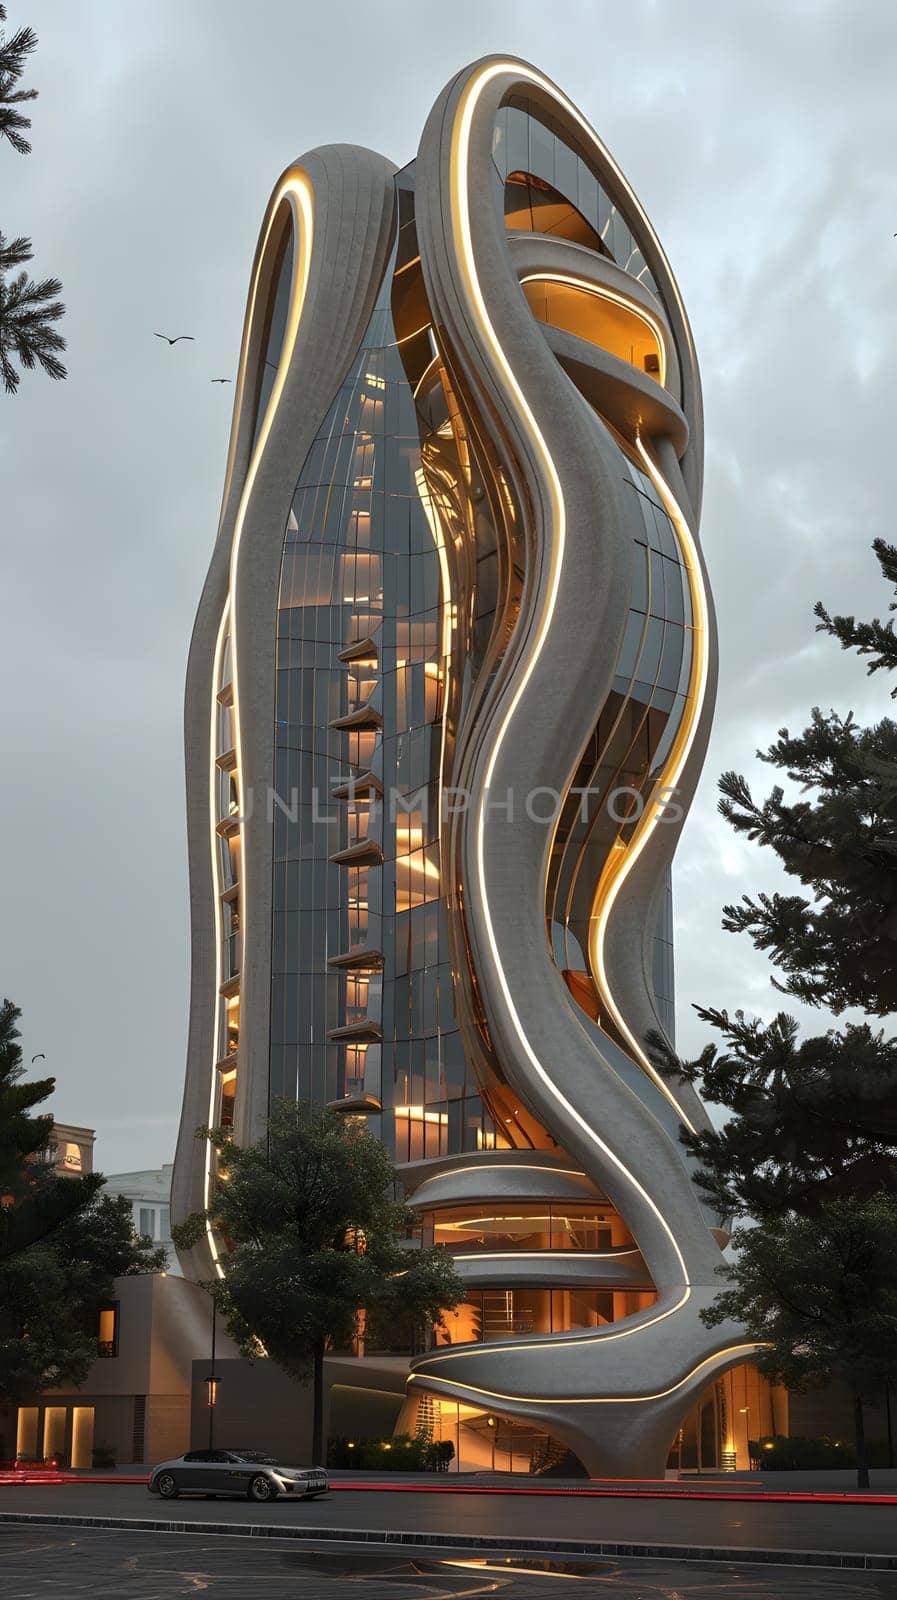 Skyhigh building with swirling urban design facade lit up at night by Nadtochiy